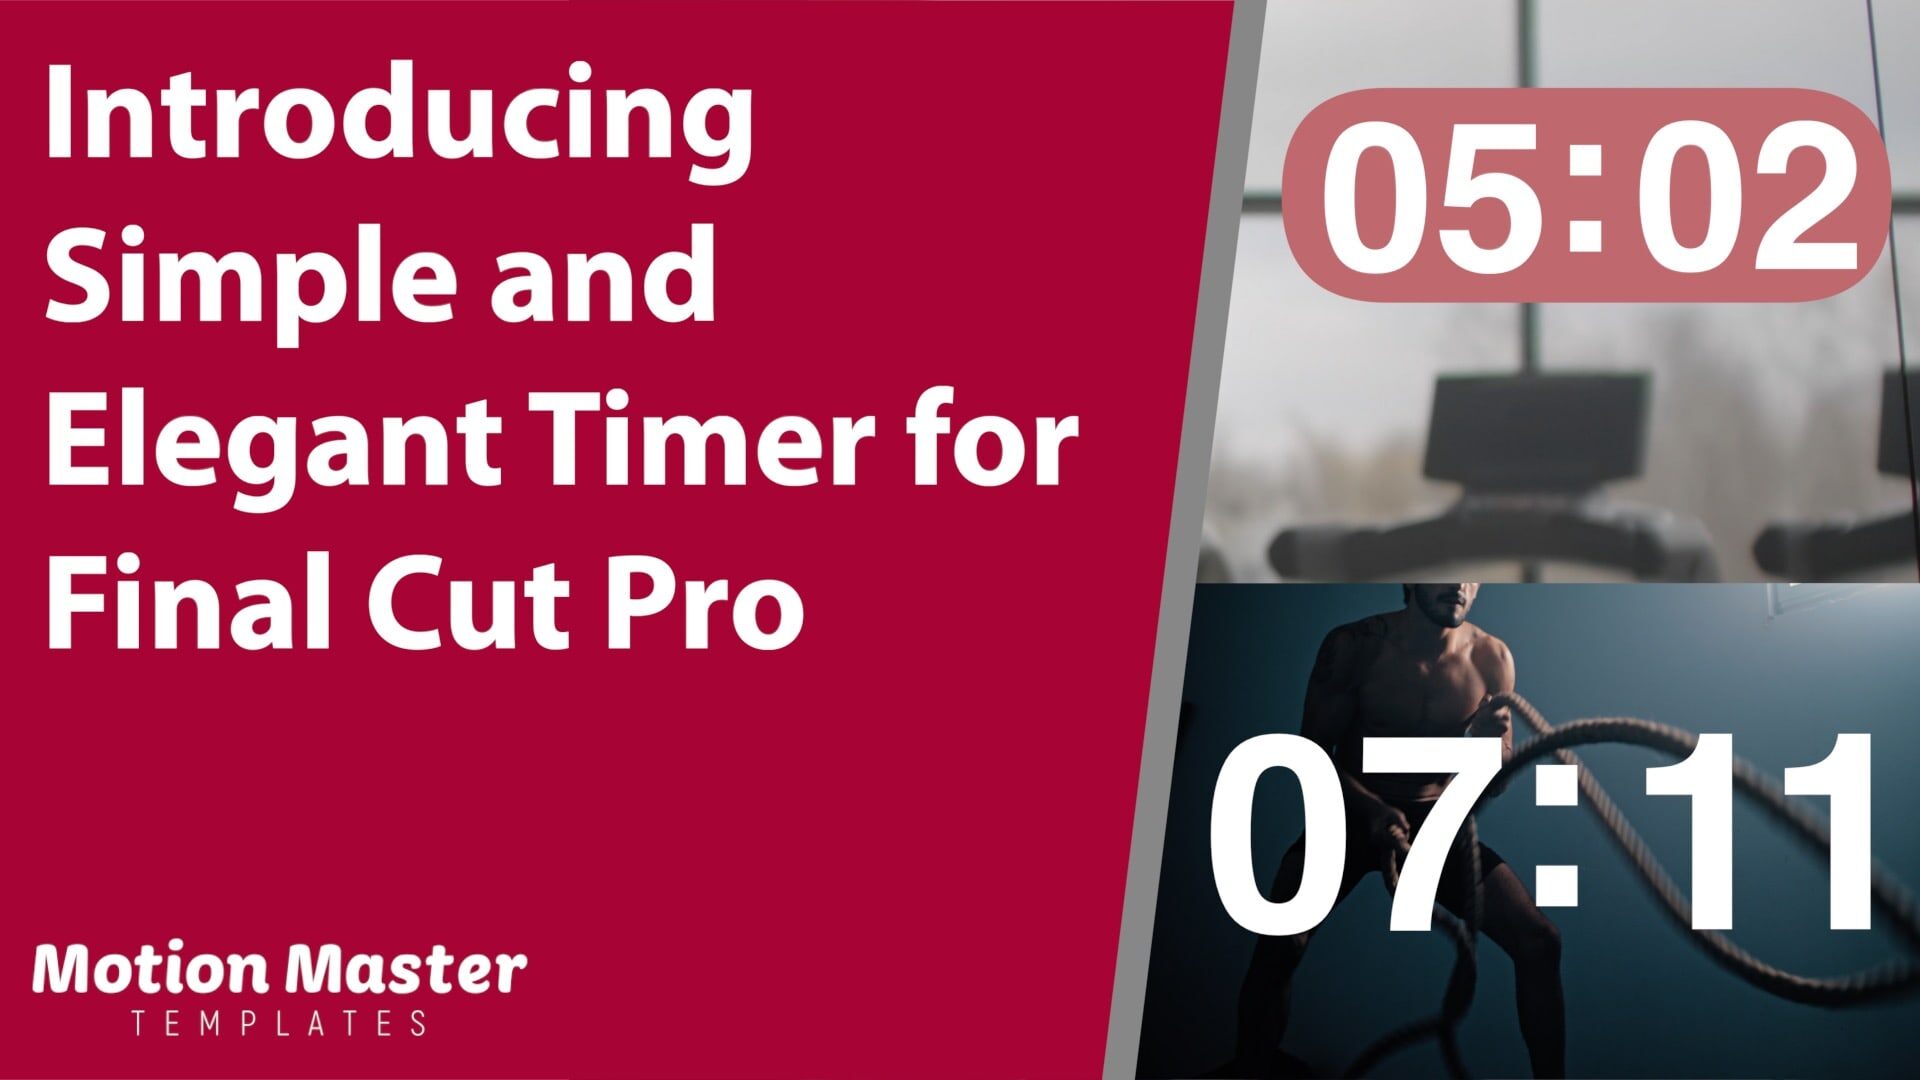 SImple Timer for Final Cut Pro | Motion Master Templates | Introducing - Simple and Elegant Timer | Animation Templates for Apple’s Final Cut & Motion Software